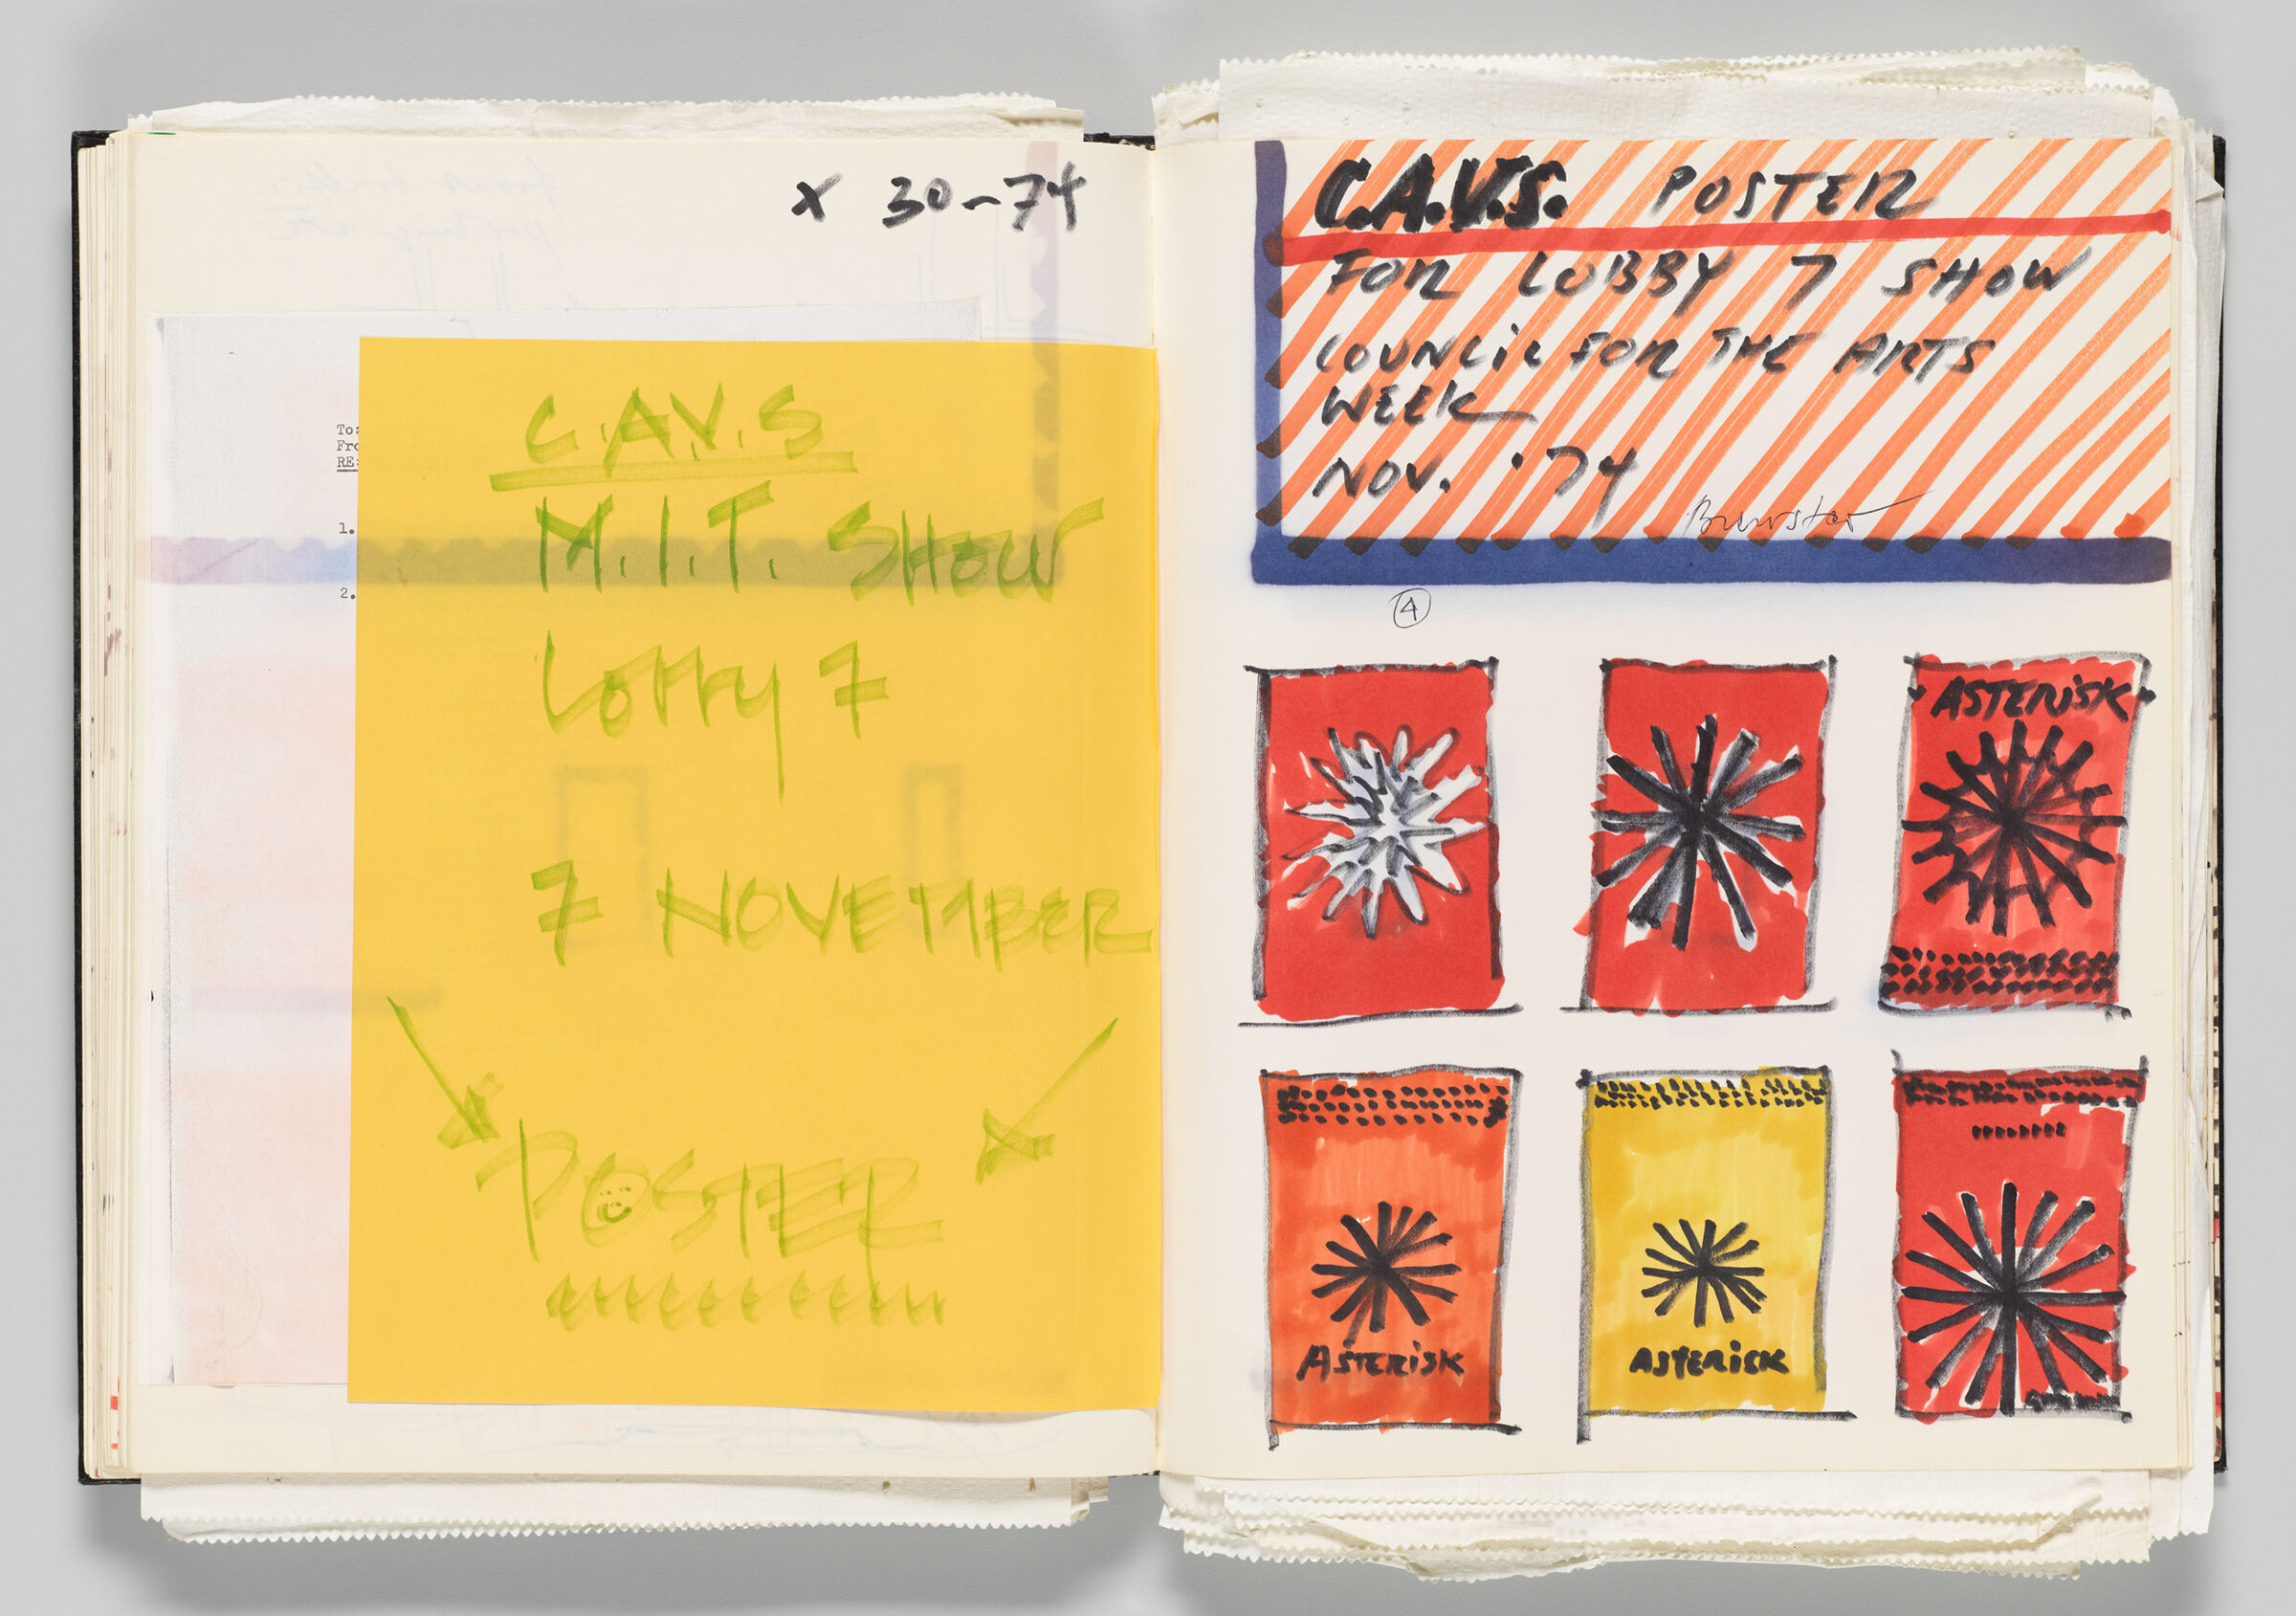 Untitled (Inserted Notes With Color Transfer, Left Page); Untitled (C.a.v.s. Poster Designs, Right Page)